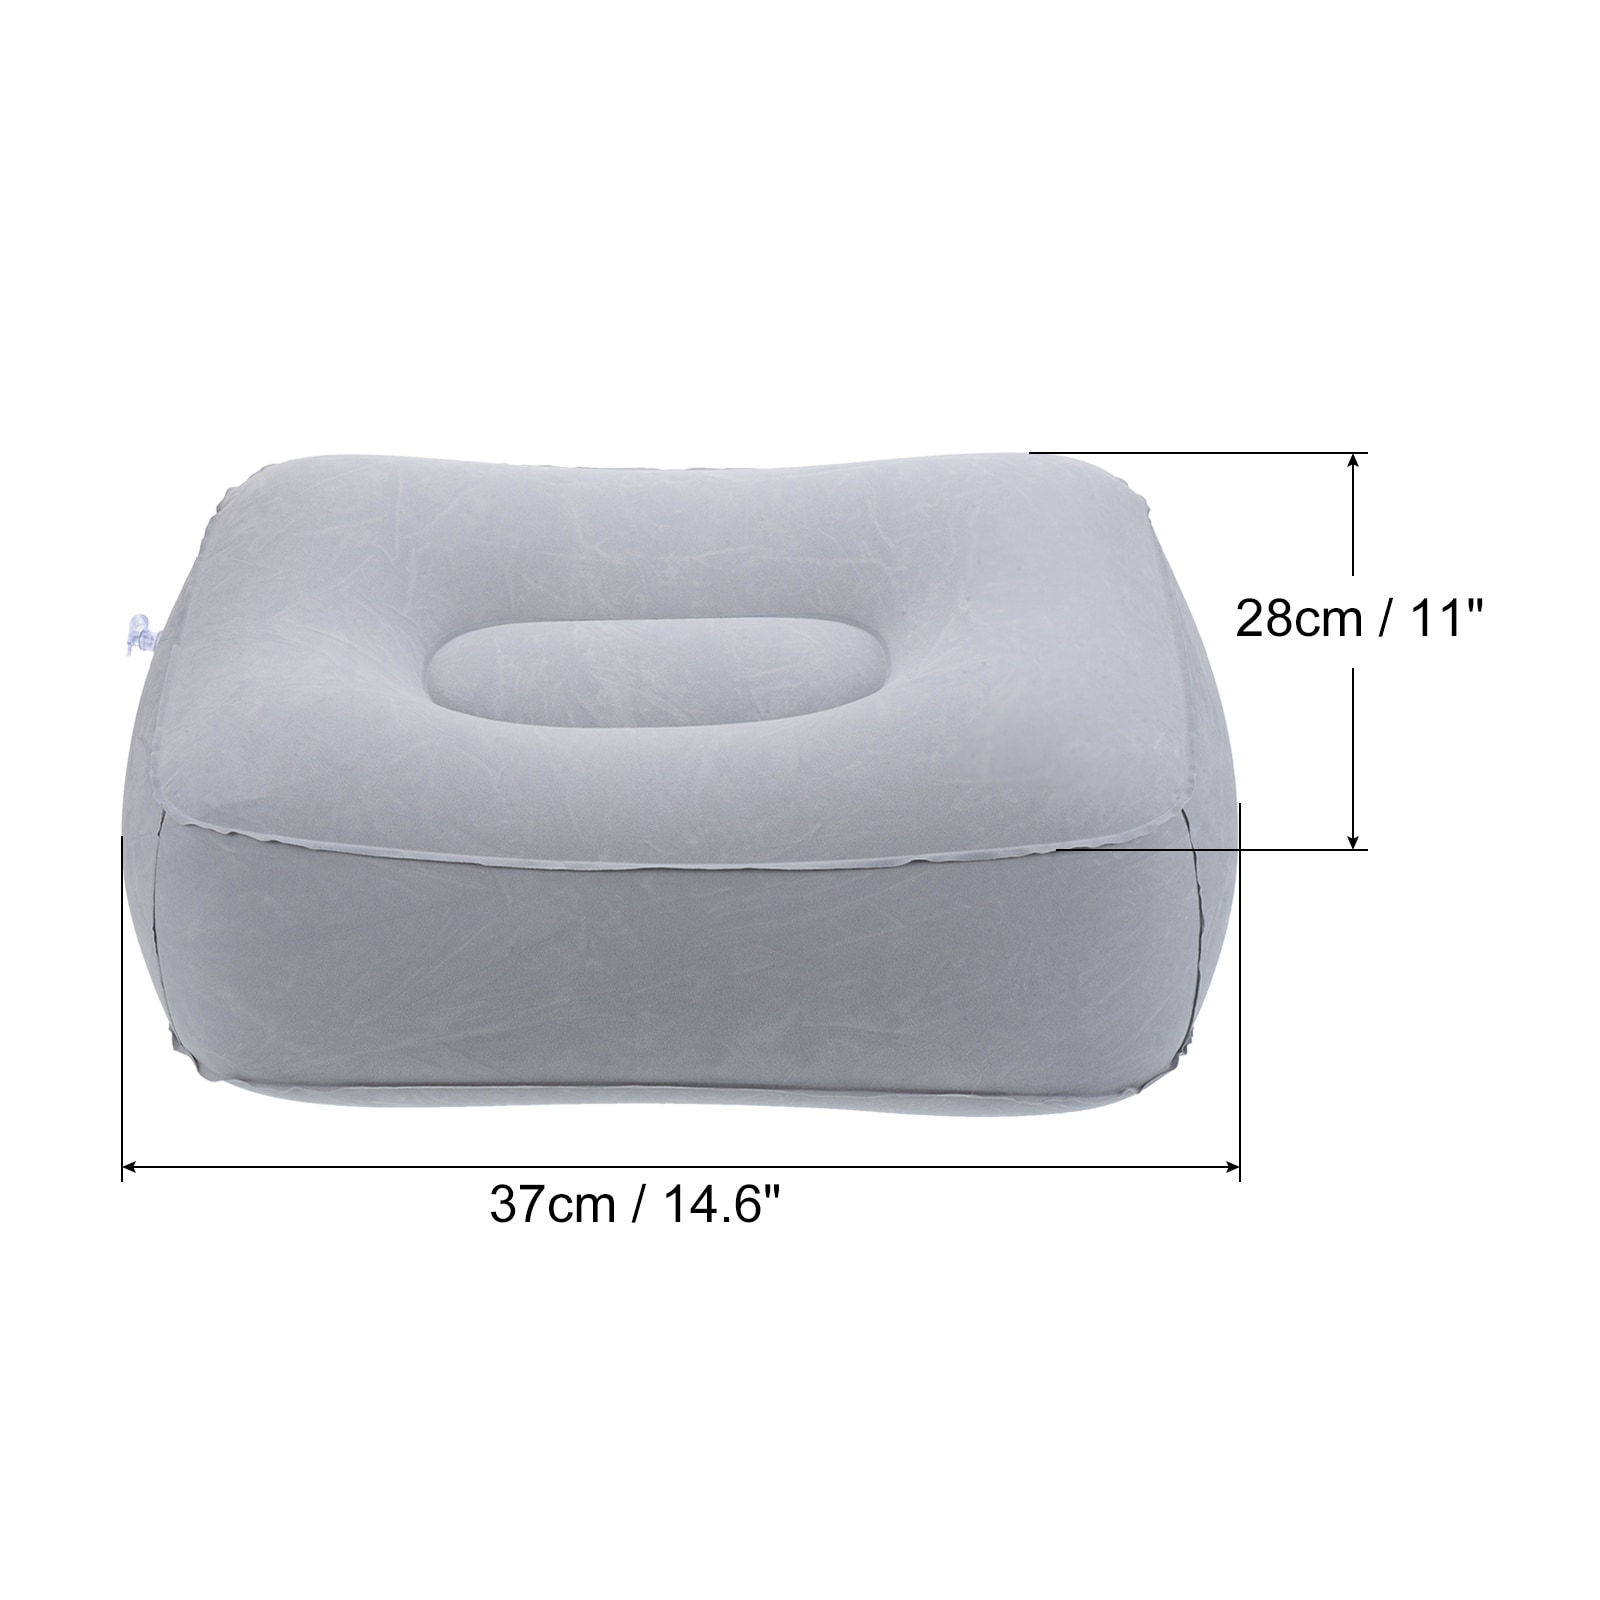 https://ak1.ostkcdn.com/images/products/is/images/direct/a0fe66c5c8c64fd343c496da26fe0f8de7745cfe/Travel-Foot-Rest-Pillow%2C-Inflatable-Foot-Rest-Mat-with-Air-Pump%2C-Gray.jpg